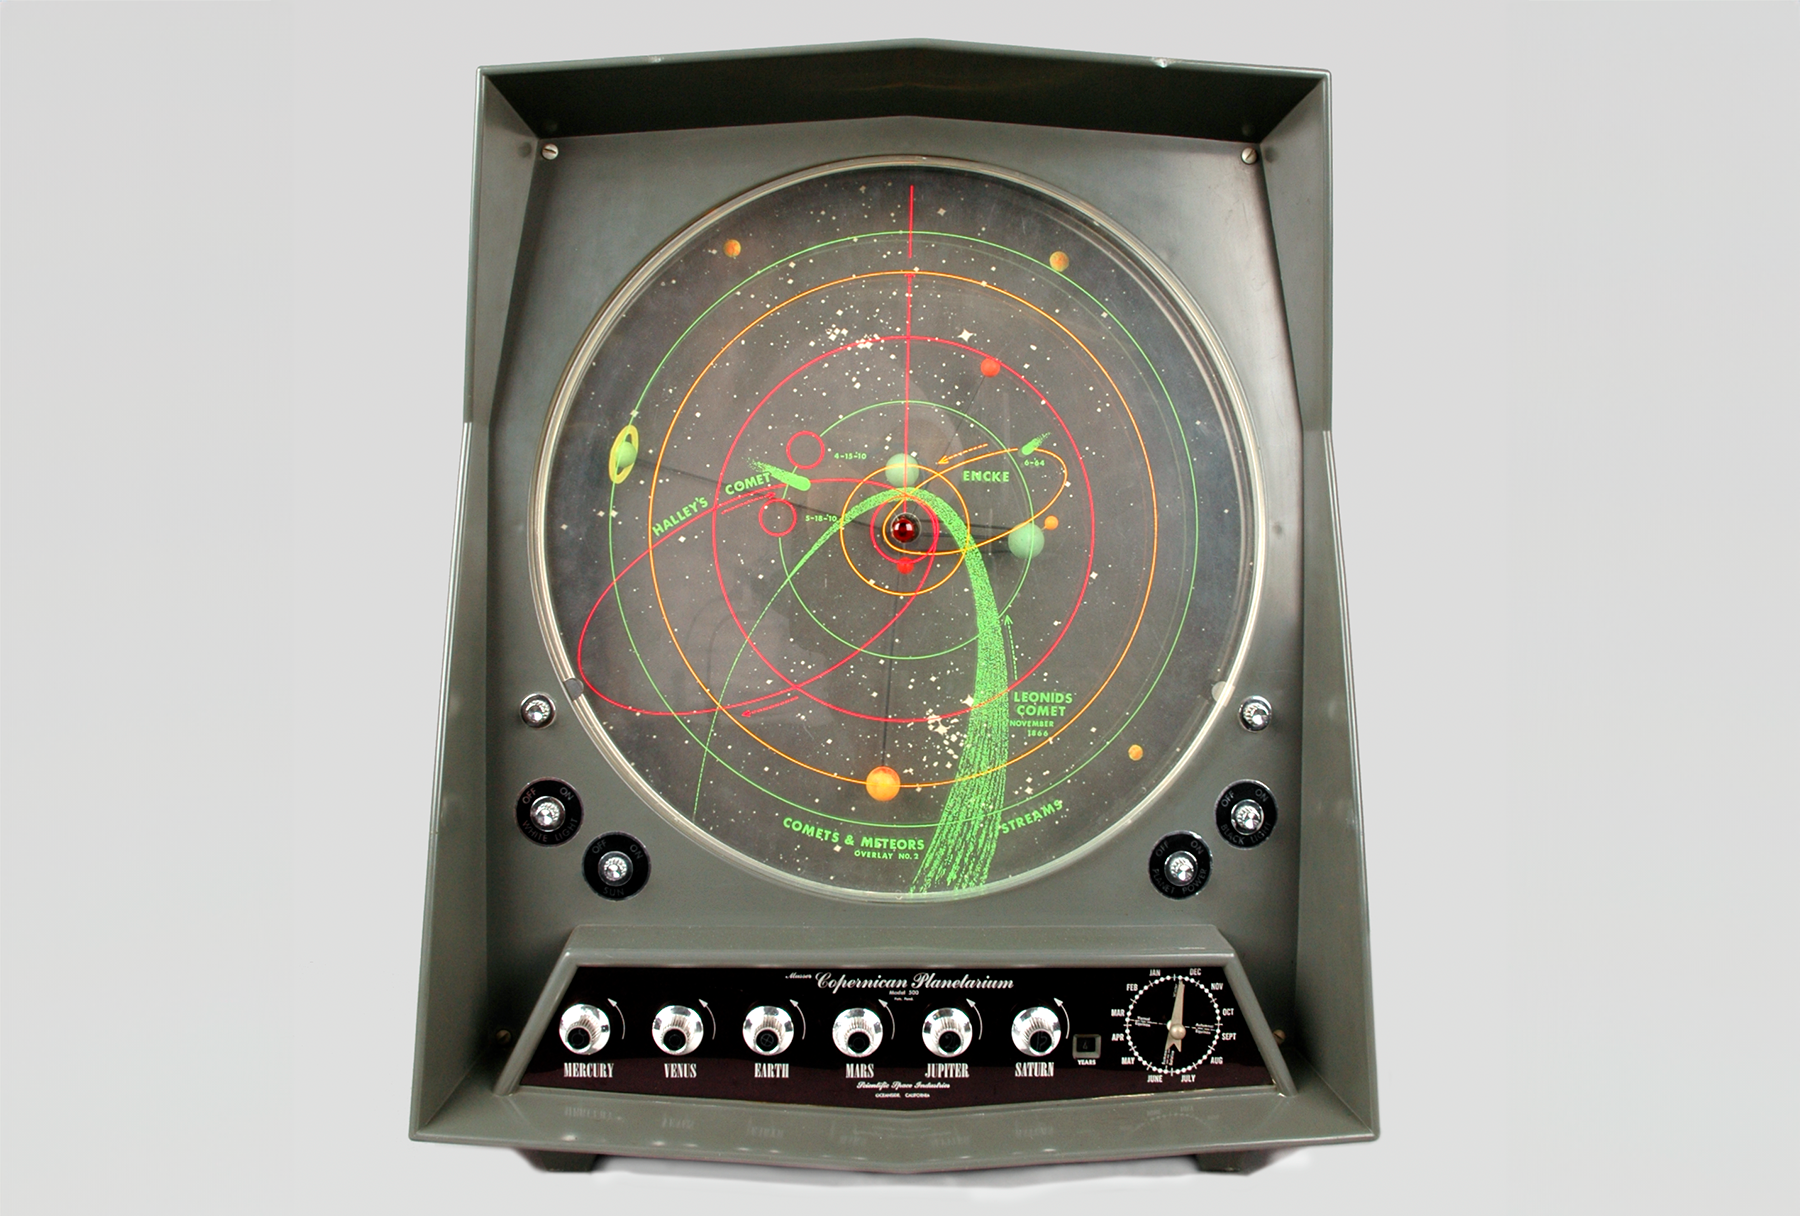 A color photo of an electronic device with knobs across the bottom and a round display depicting the solar system.